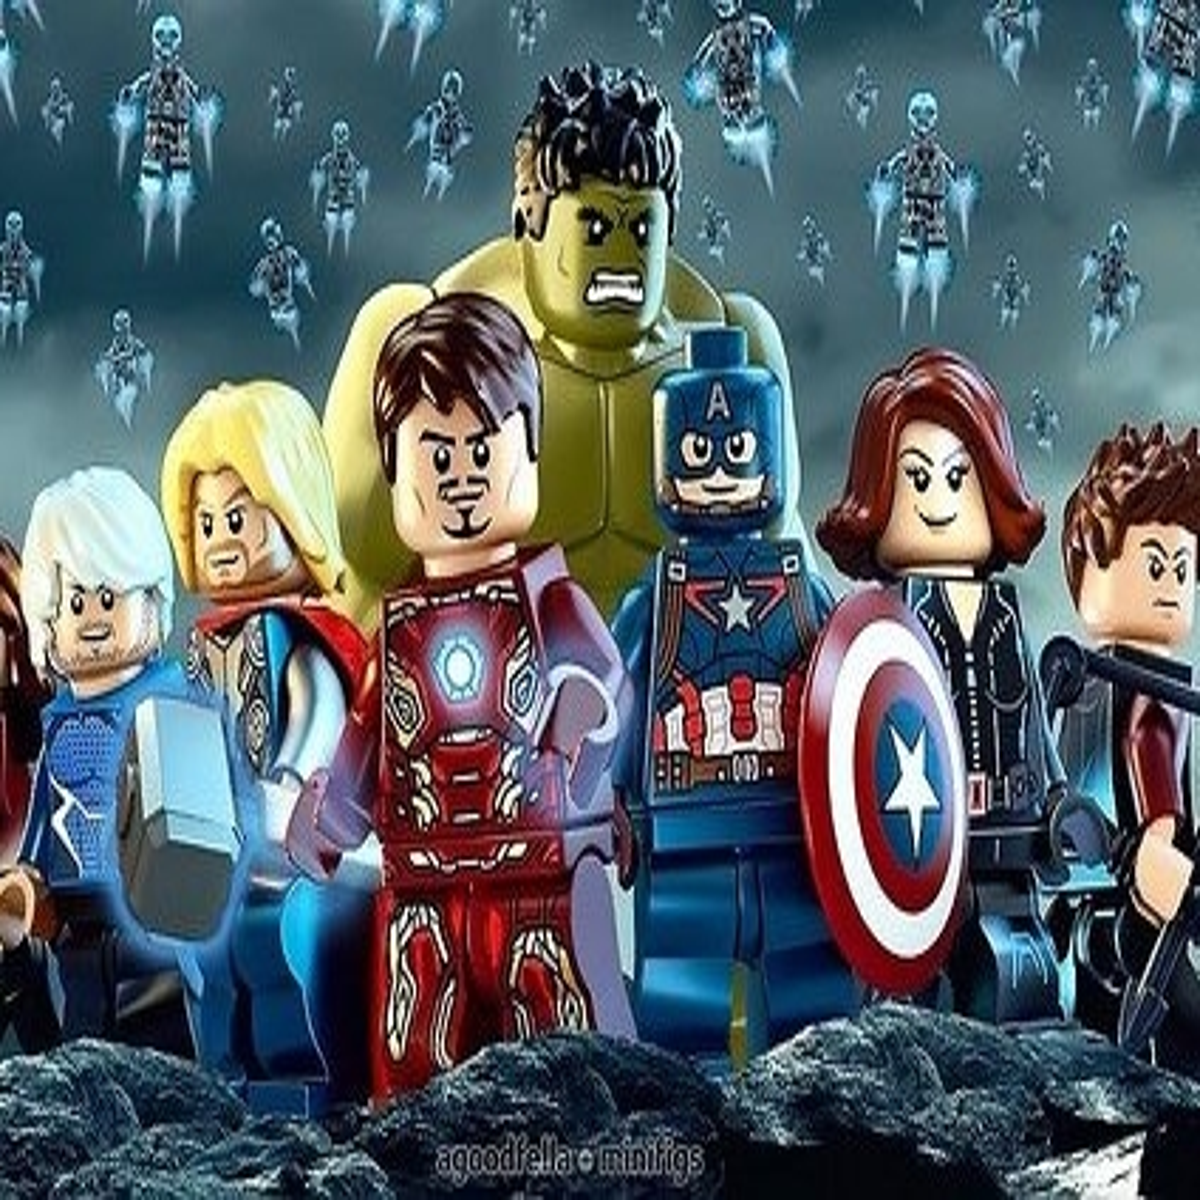 Avengers Assemble – Movies on Google Play